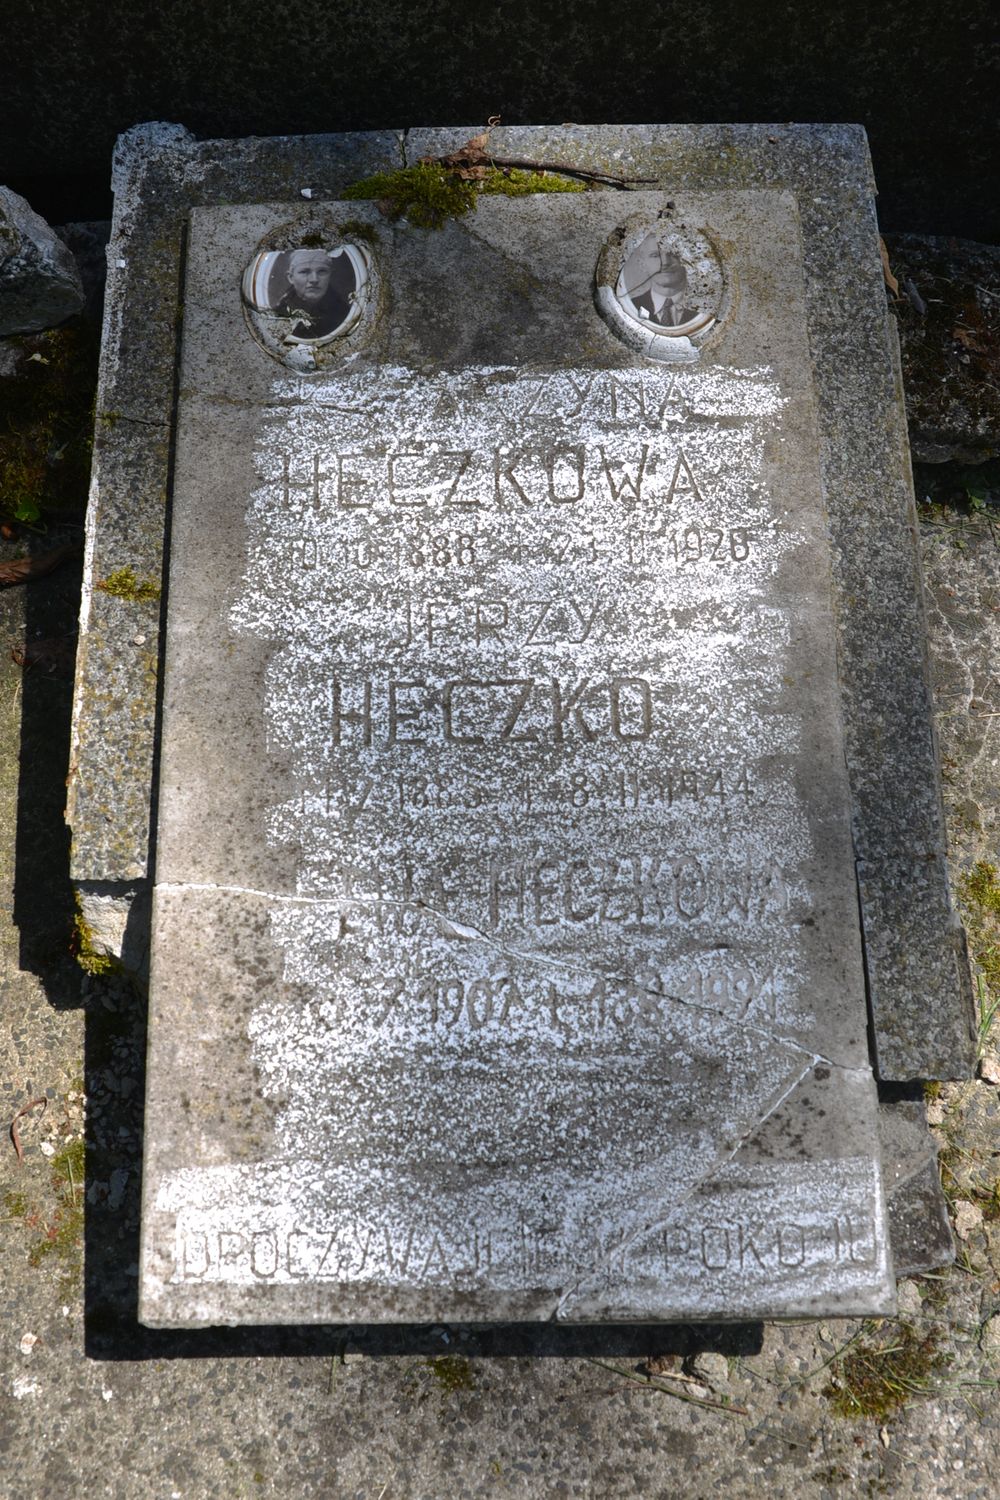 Inscription plaque from the tomb of Eve, George and Catherine Heczek, cemetery in Karviná Mexico, Czech Republic, as of 2022